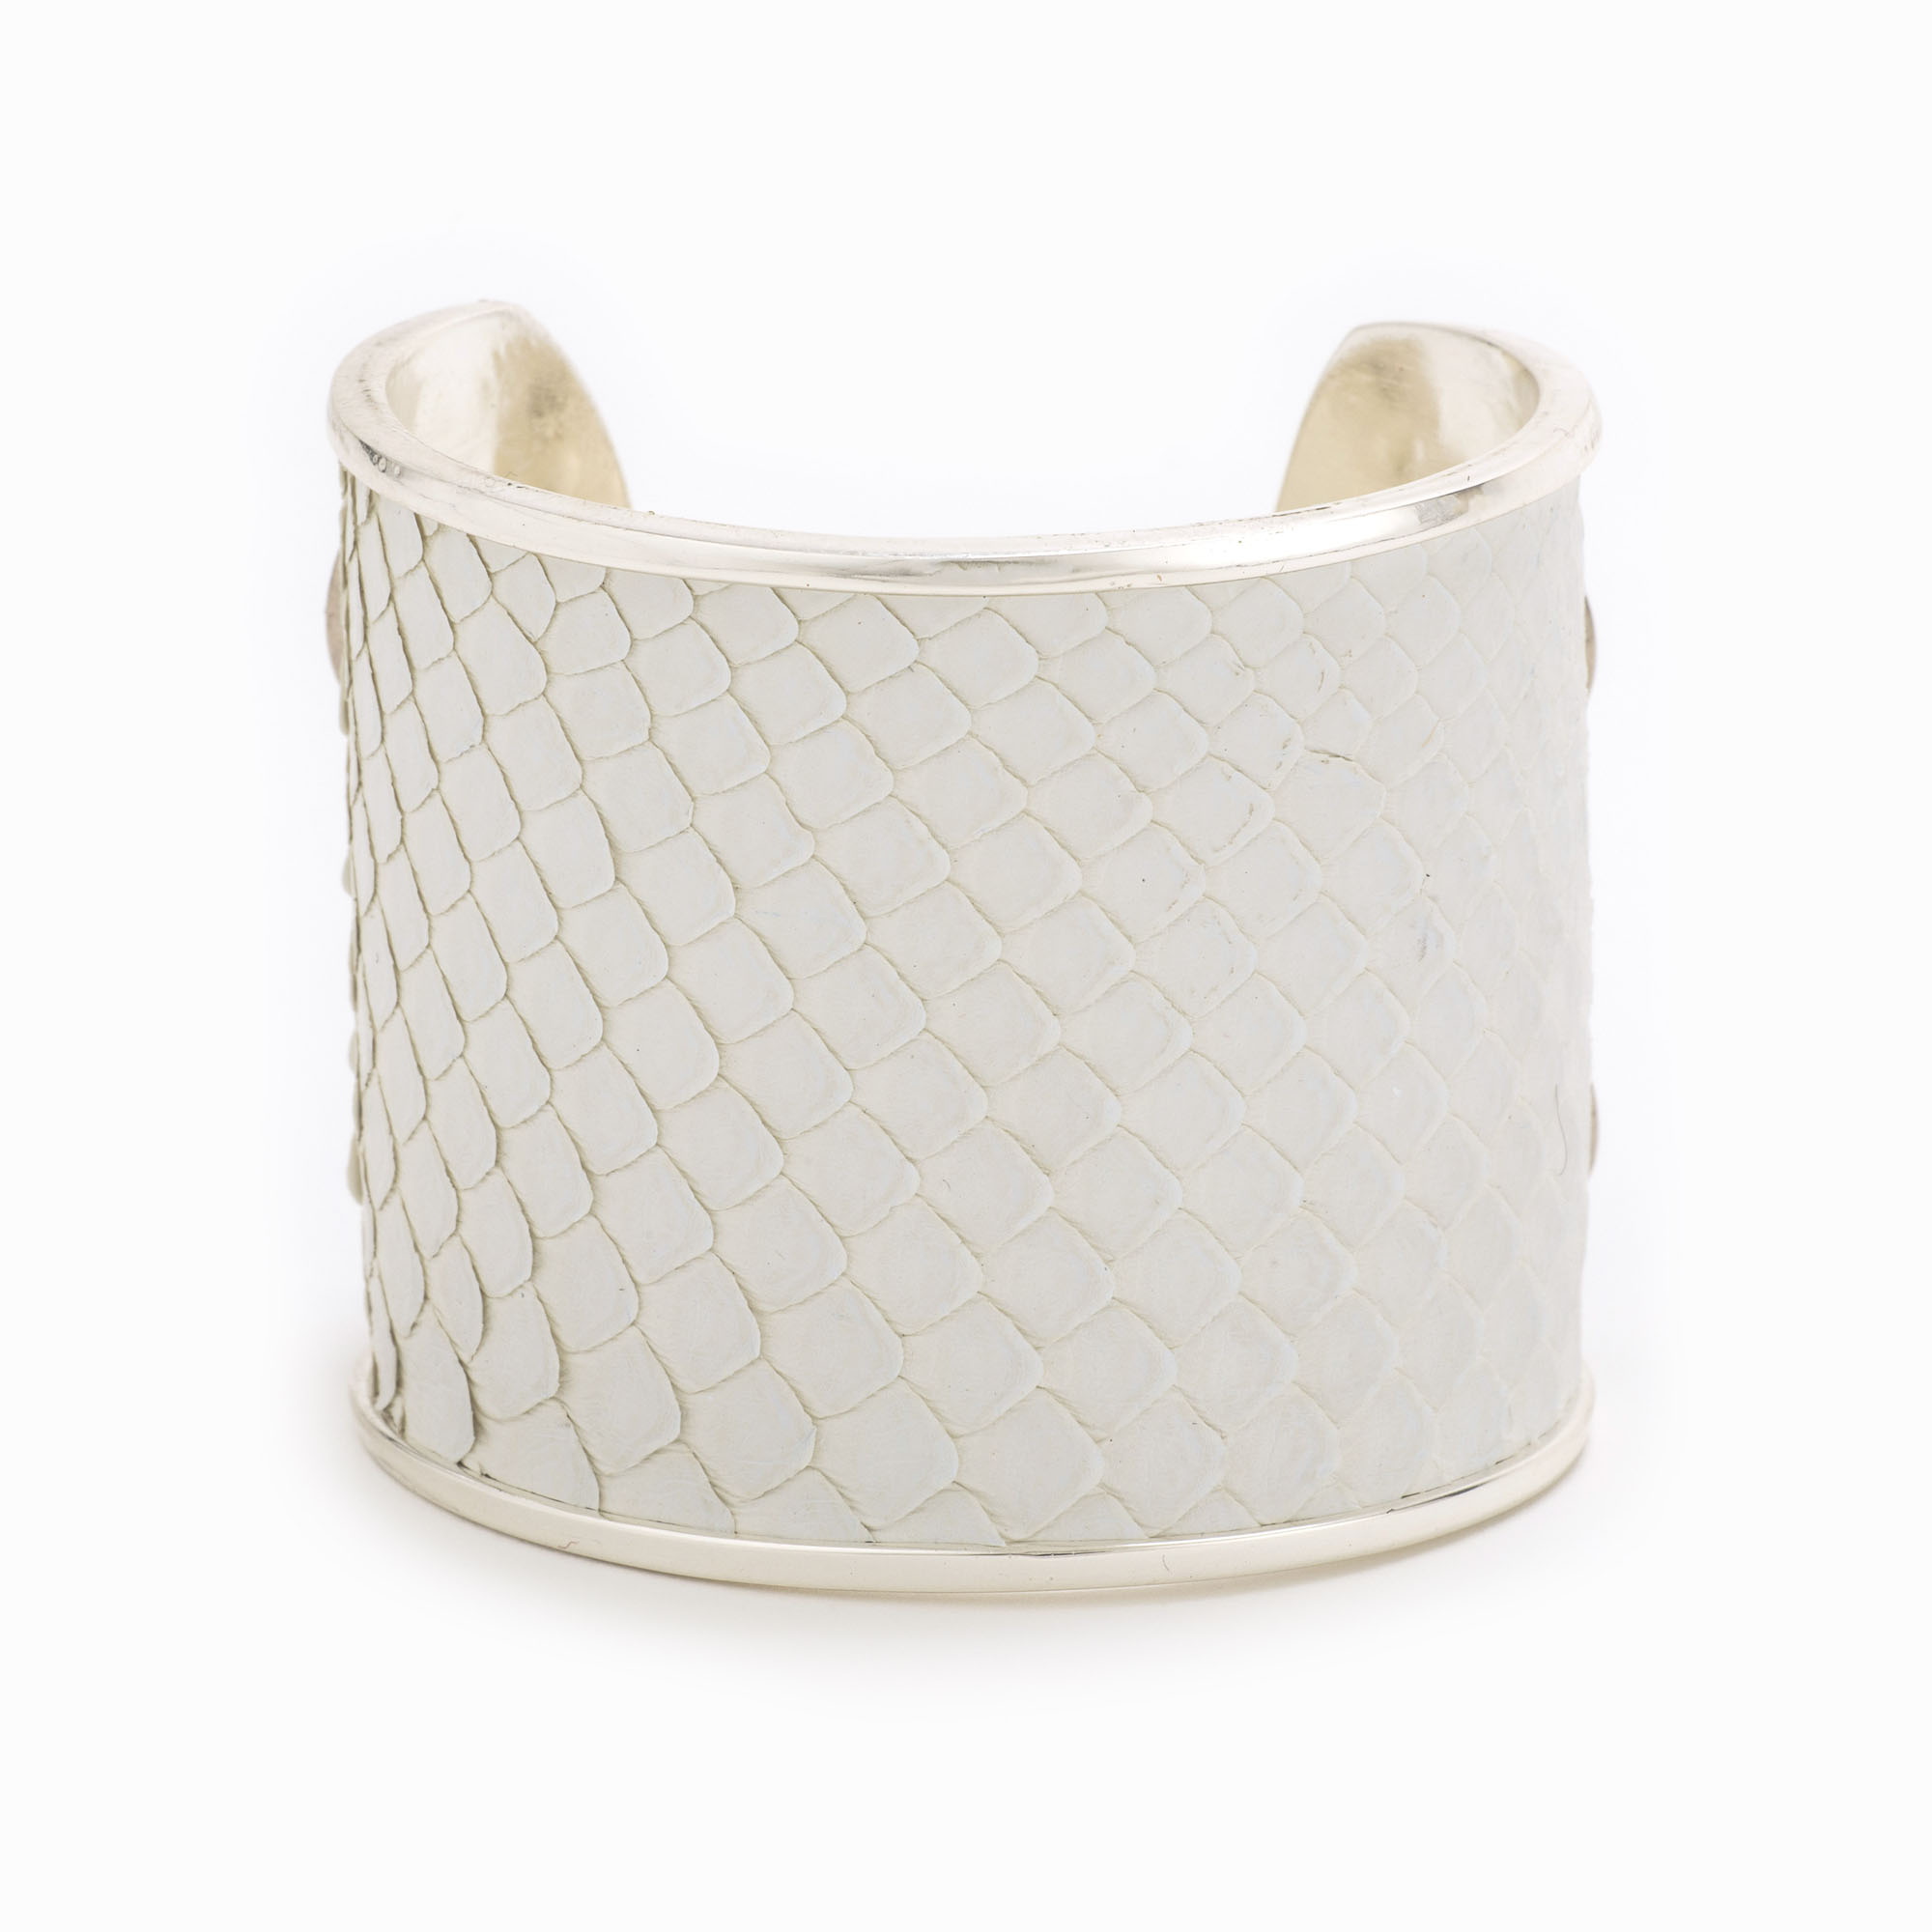 A large silver cuff with white colored snakeskin pattern inlaid.